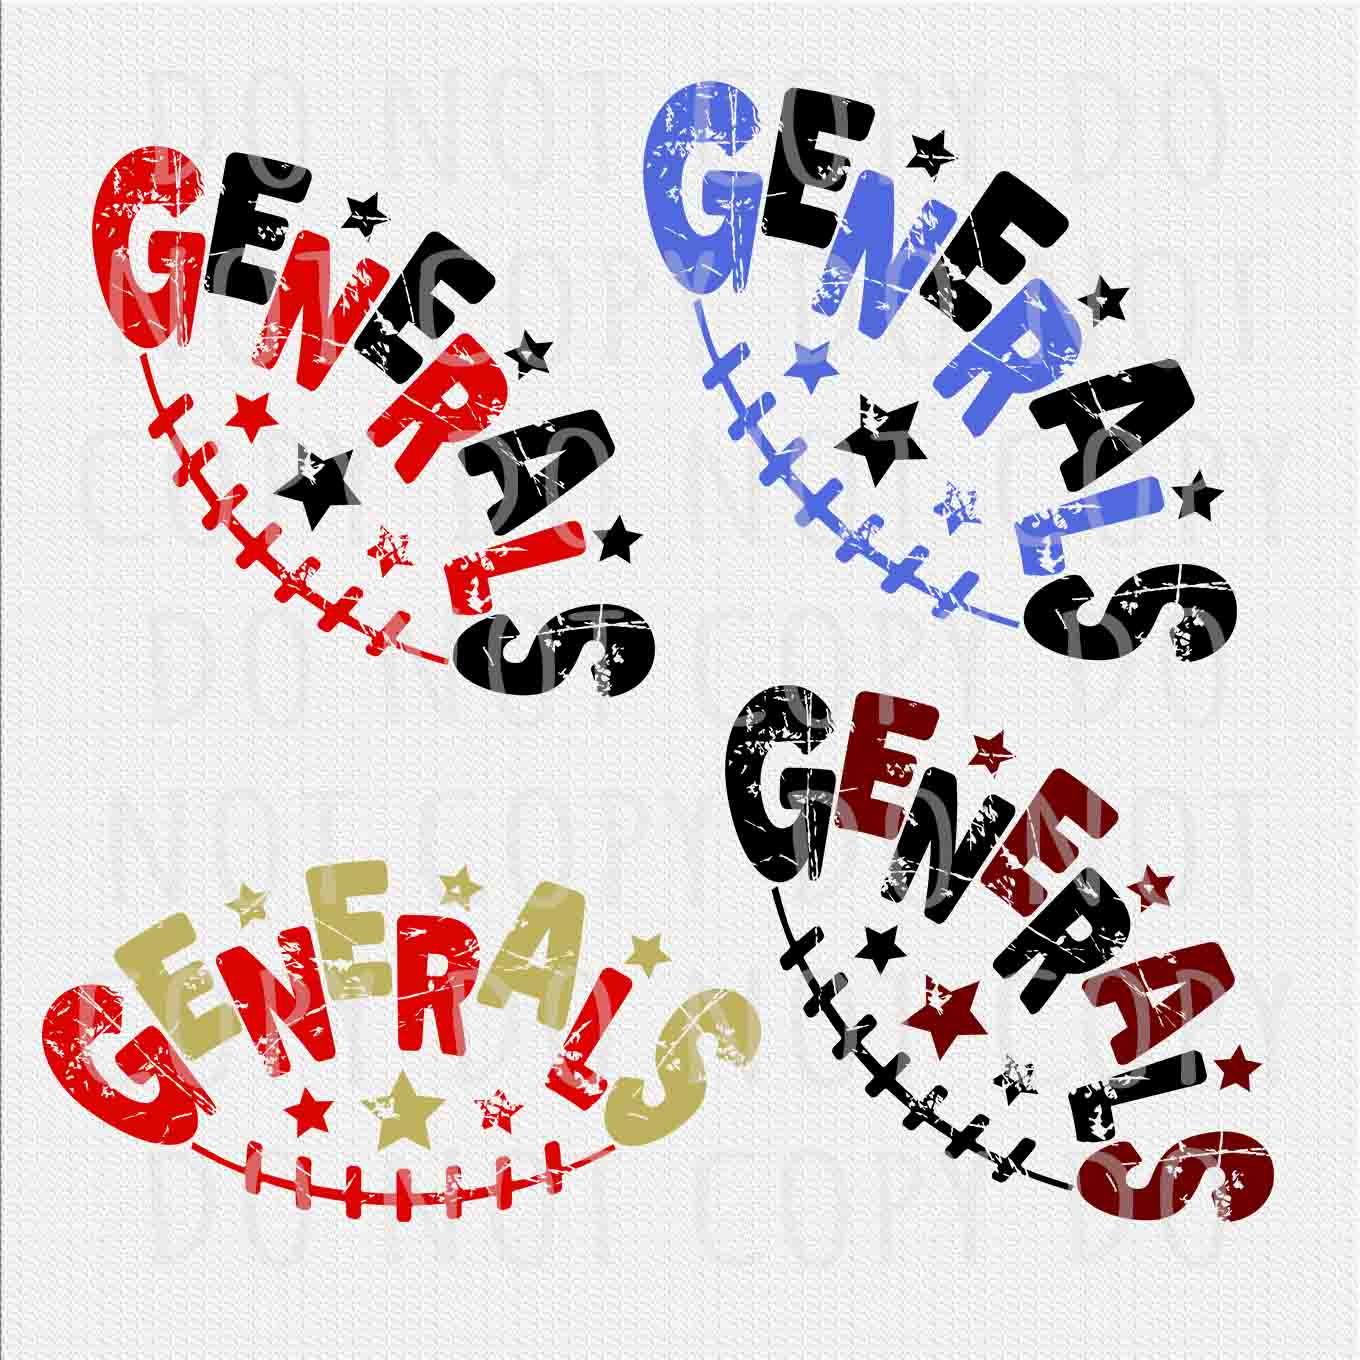 Generals png (+ 3 designs FREE), Generals Black Gold Royal bluy Red Colors Distressed Letters Stars Football Mascot png